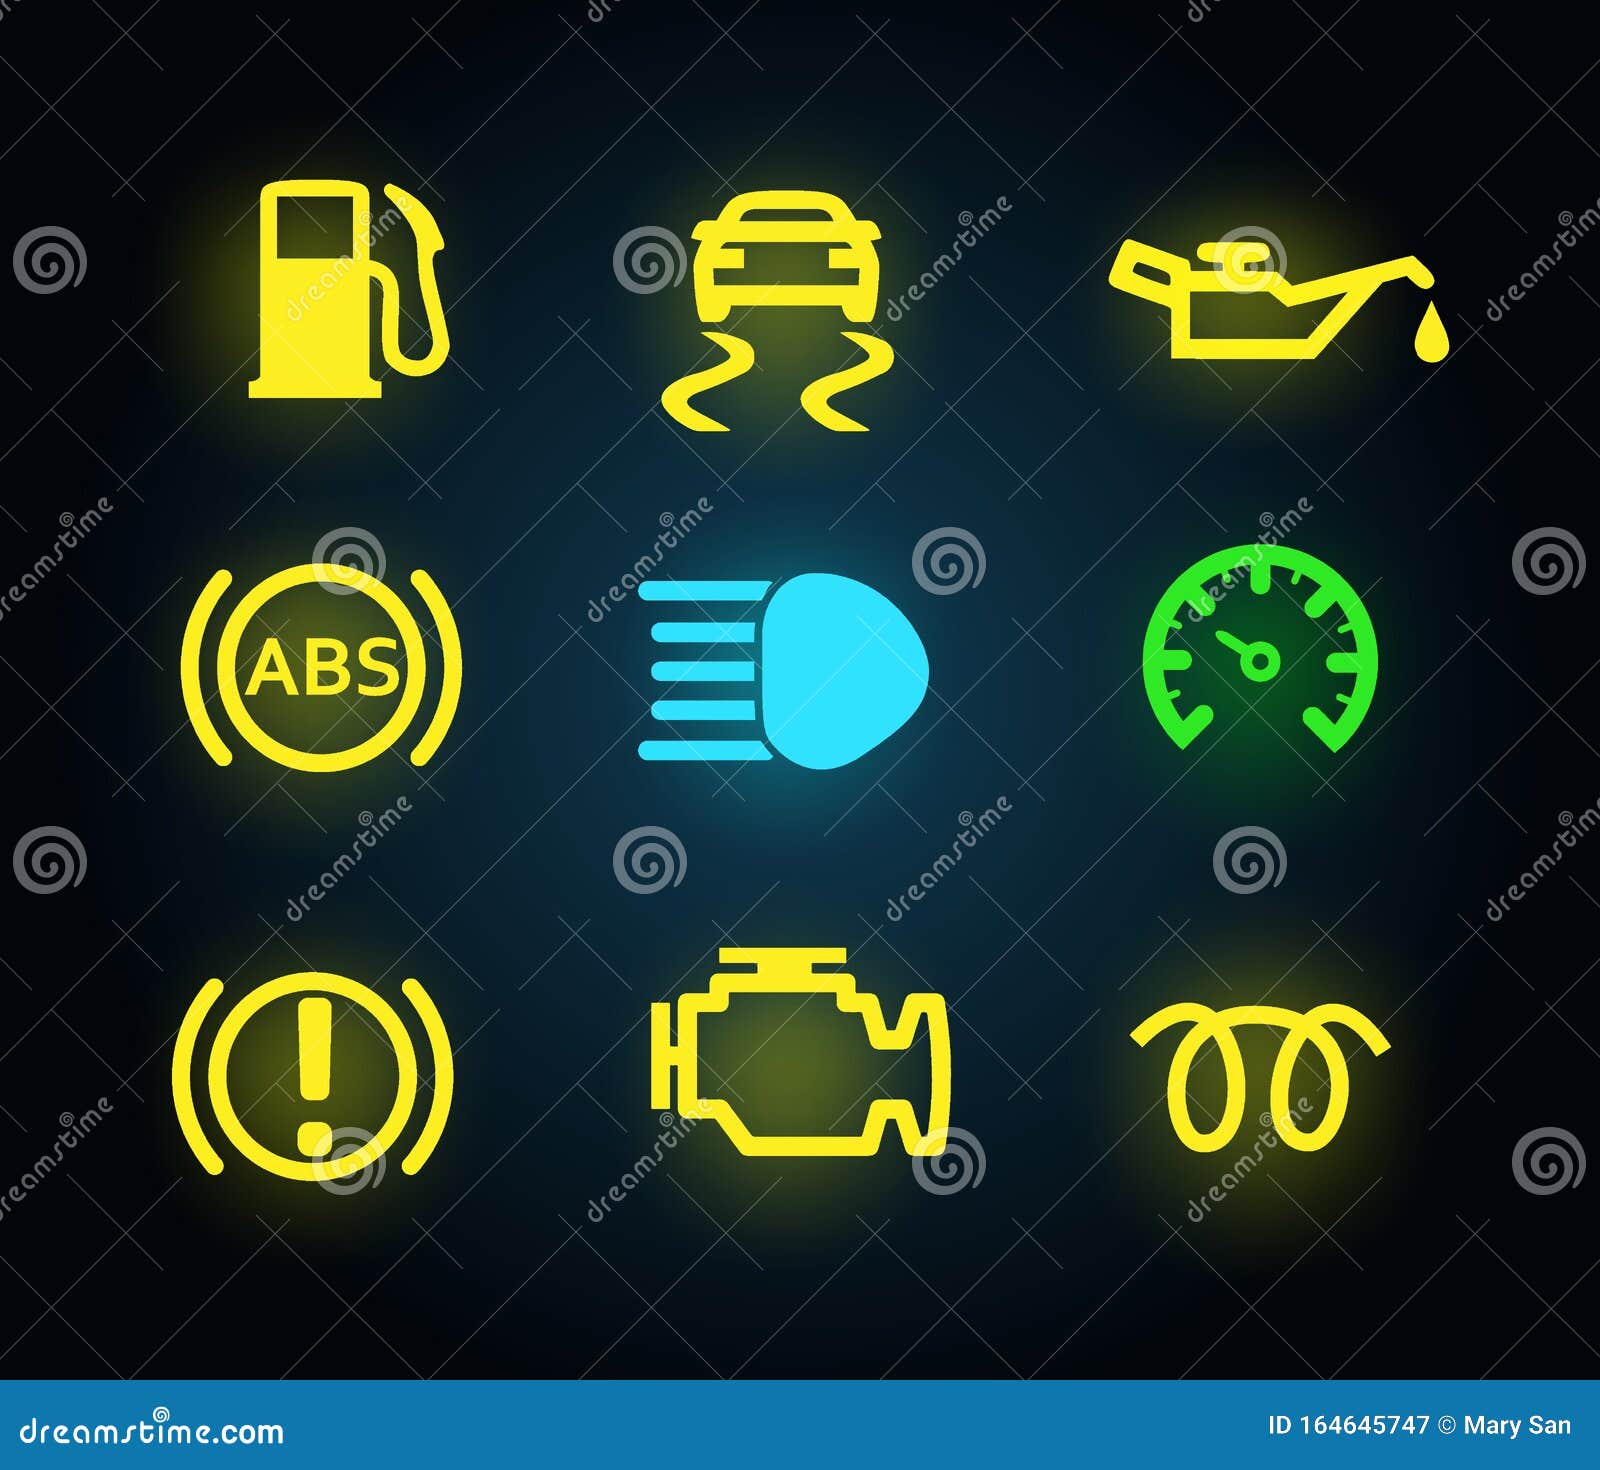 Printable Car Dashboard Diagram with Labels and Warning Light Symbols